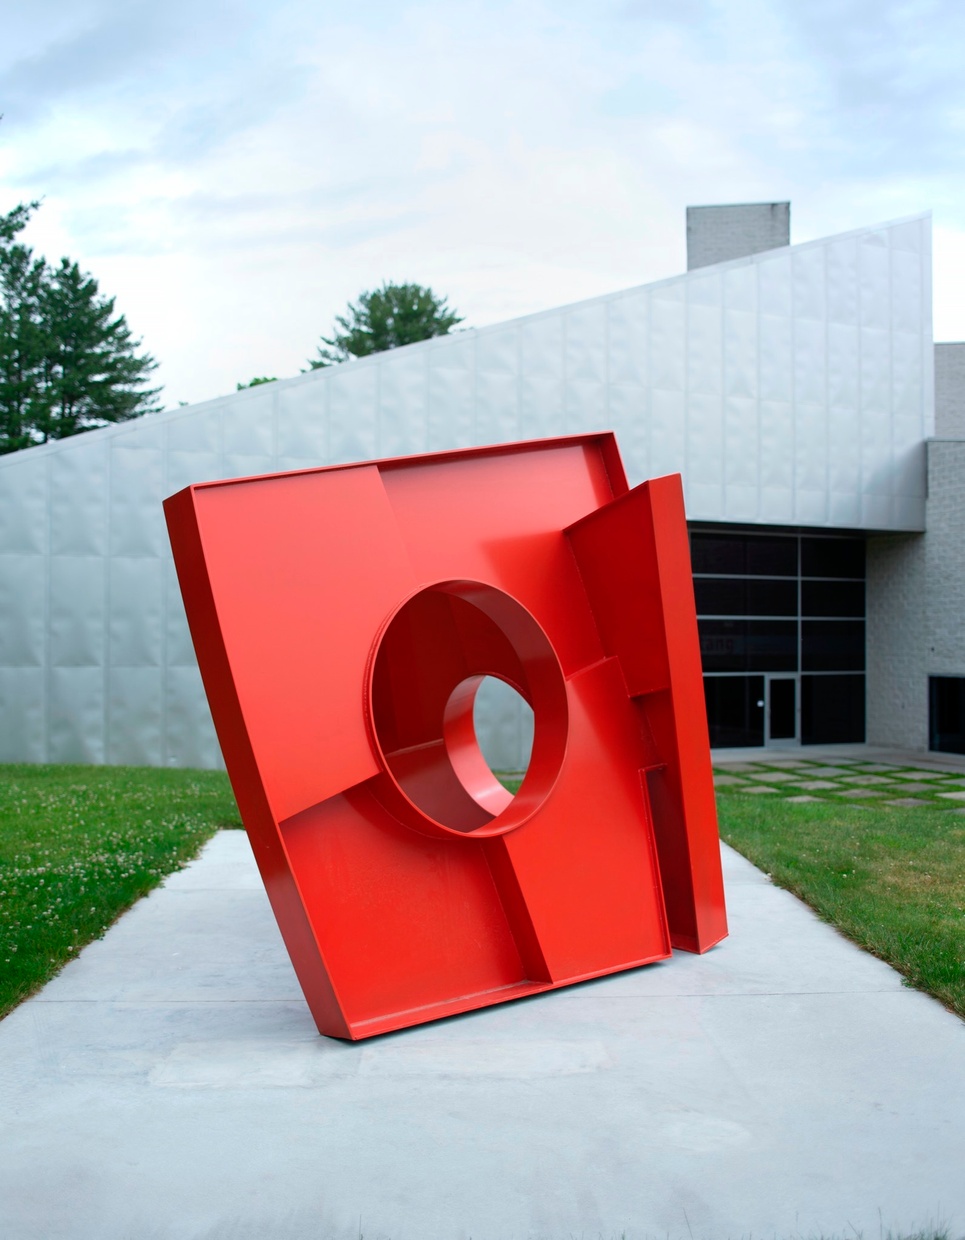 Another view of a large red geometric sculpture sitting in the grass on a concrete platform in front of a gray triangular building.